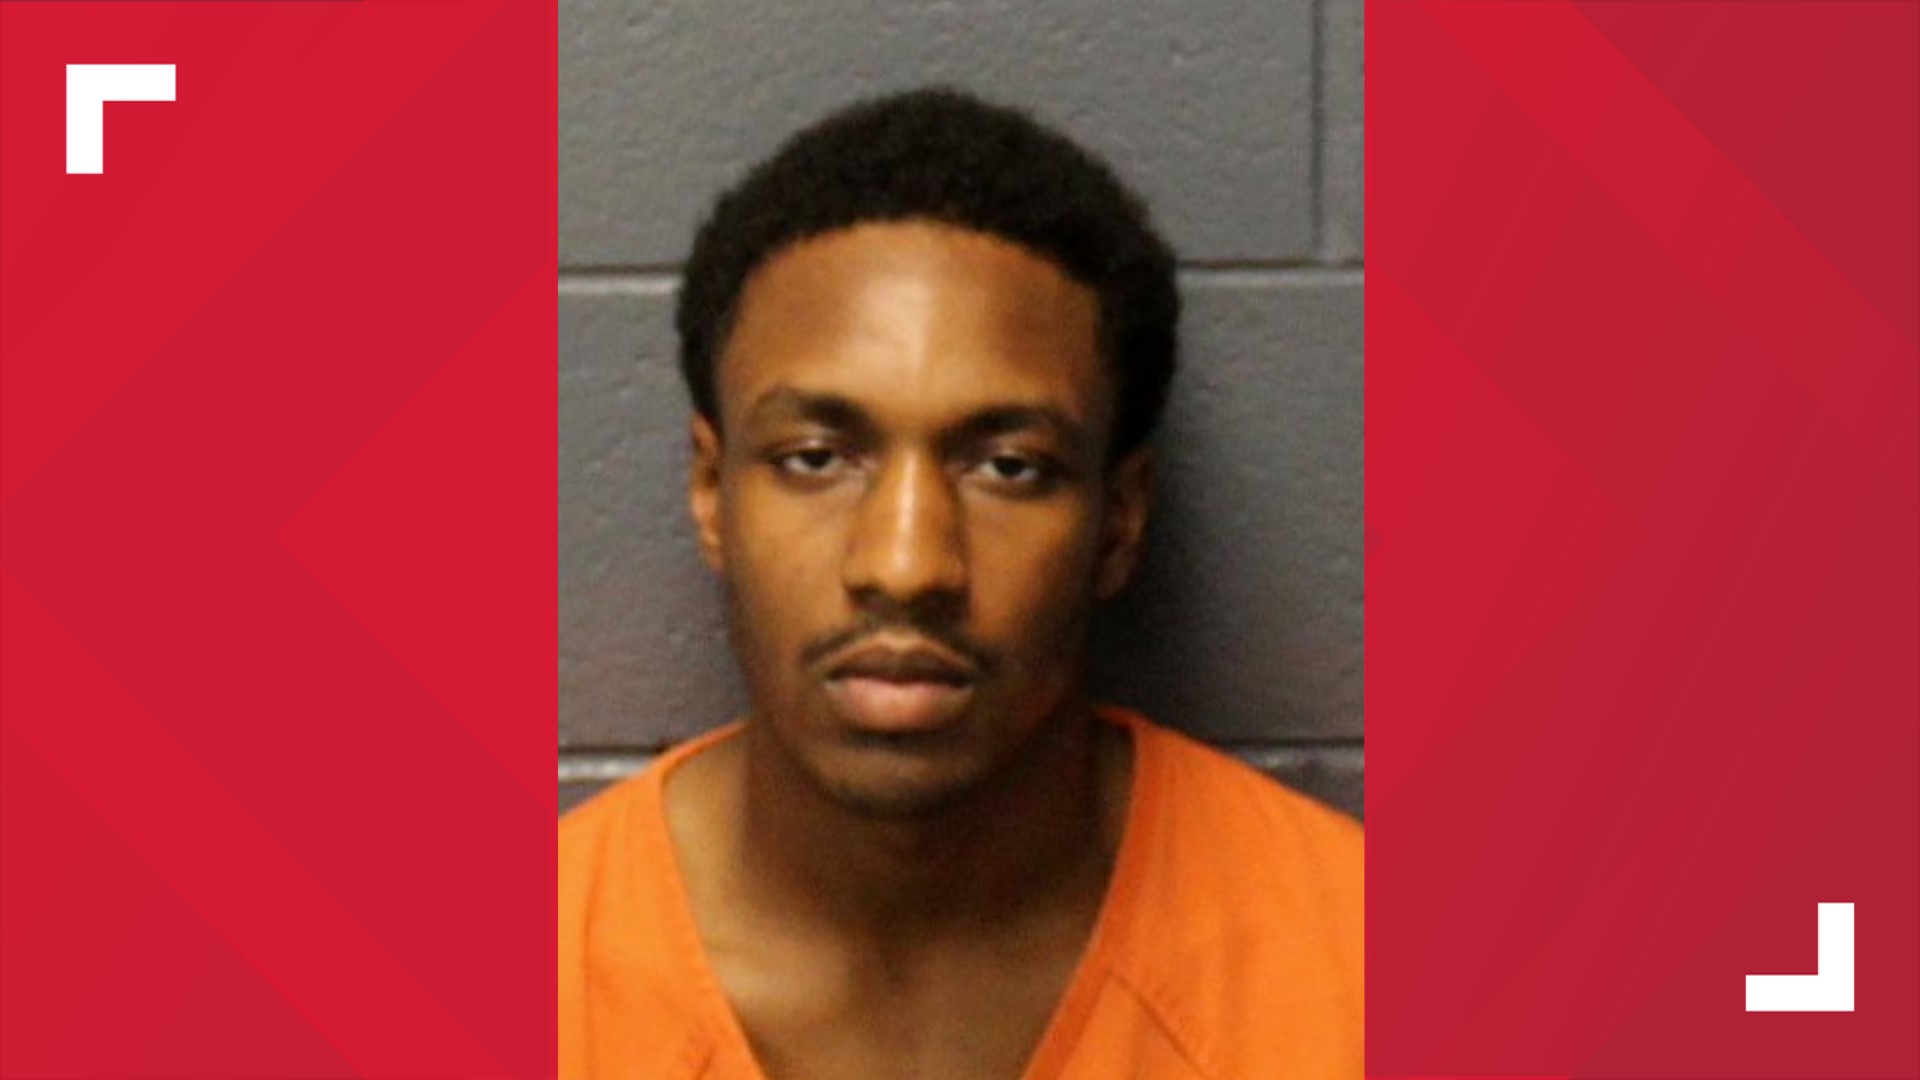 Raquiah King, 20, was found dead near an intersection in Hanover County. About a month later, investigators arrested Emmanuel Coble, 27, and charged him with murder.